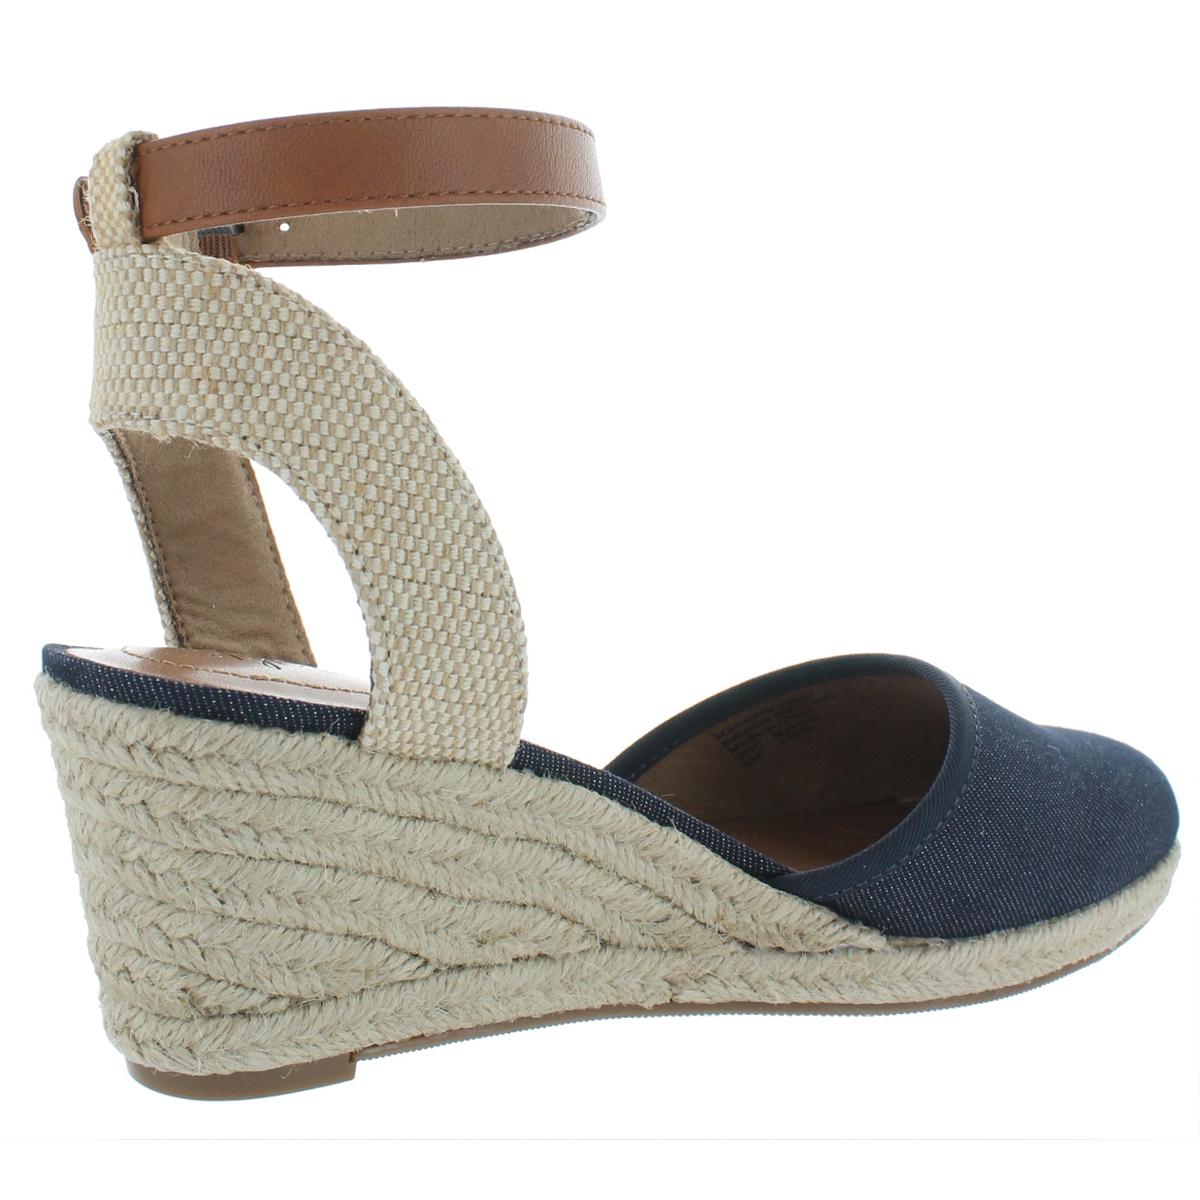 Style & Co. Womens Mailena Espadrille Wedge Sandals Shoes BHFO 5862 | eBay